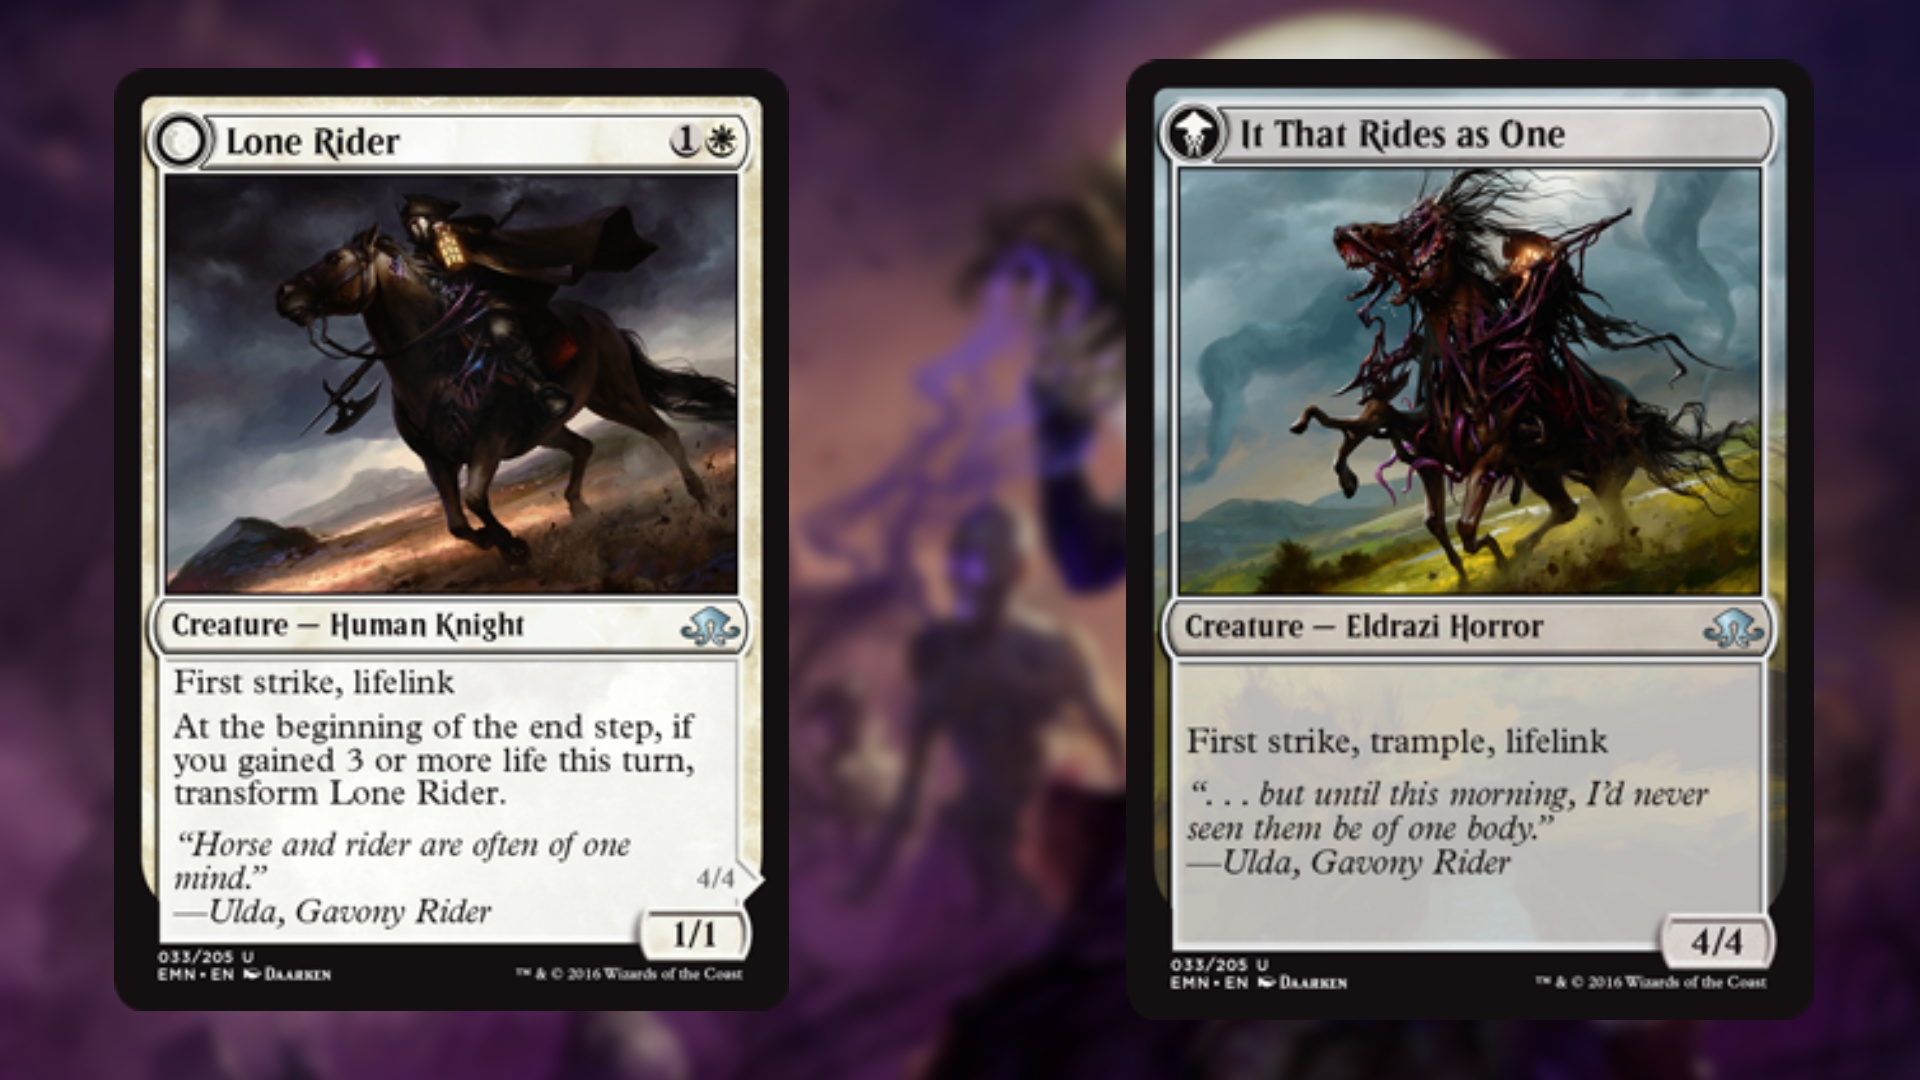 magic the gathering cards two in a row with one featuring a soldier riding on a horse while the other featuring a horrific amalgamation of both horse and rider as a single creature